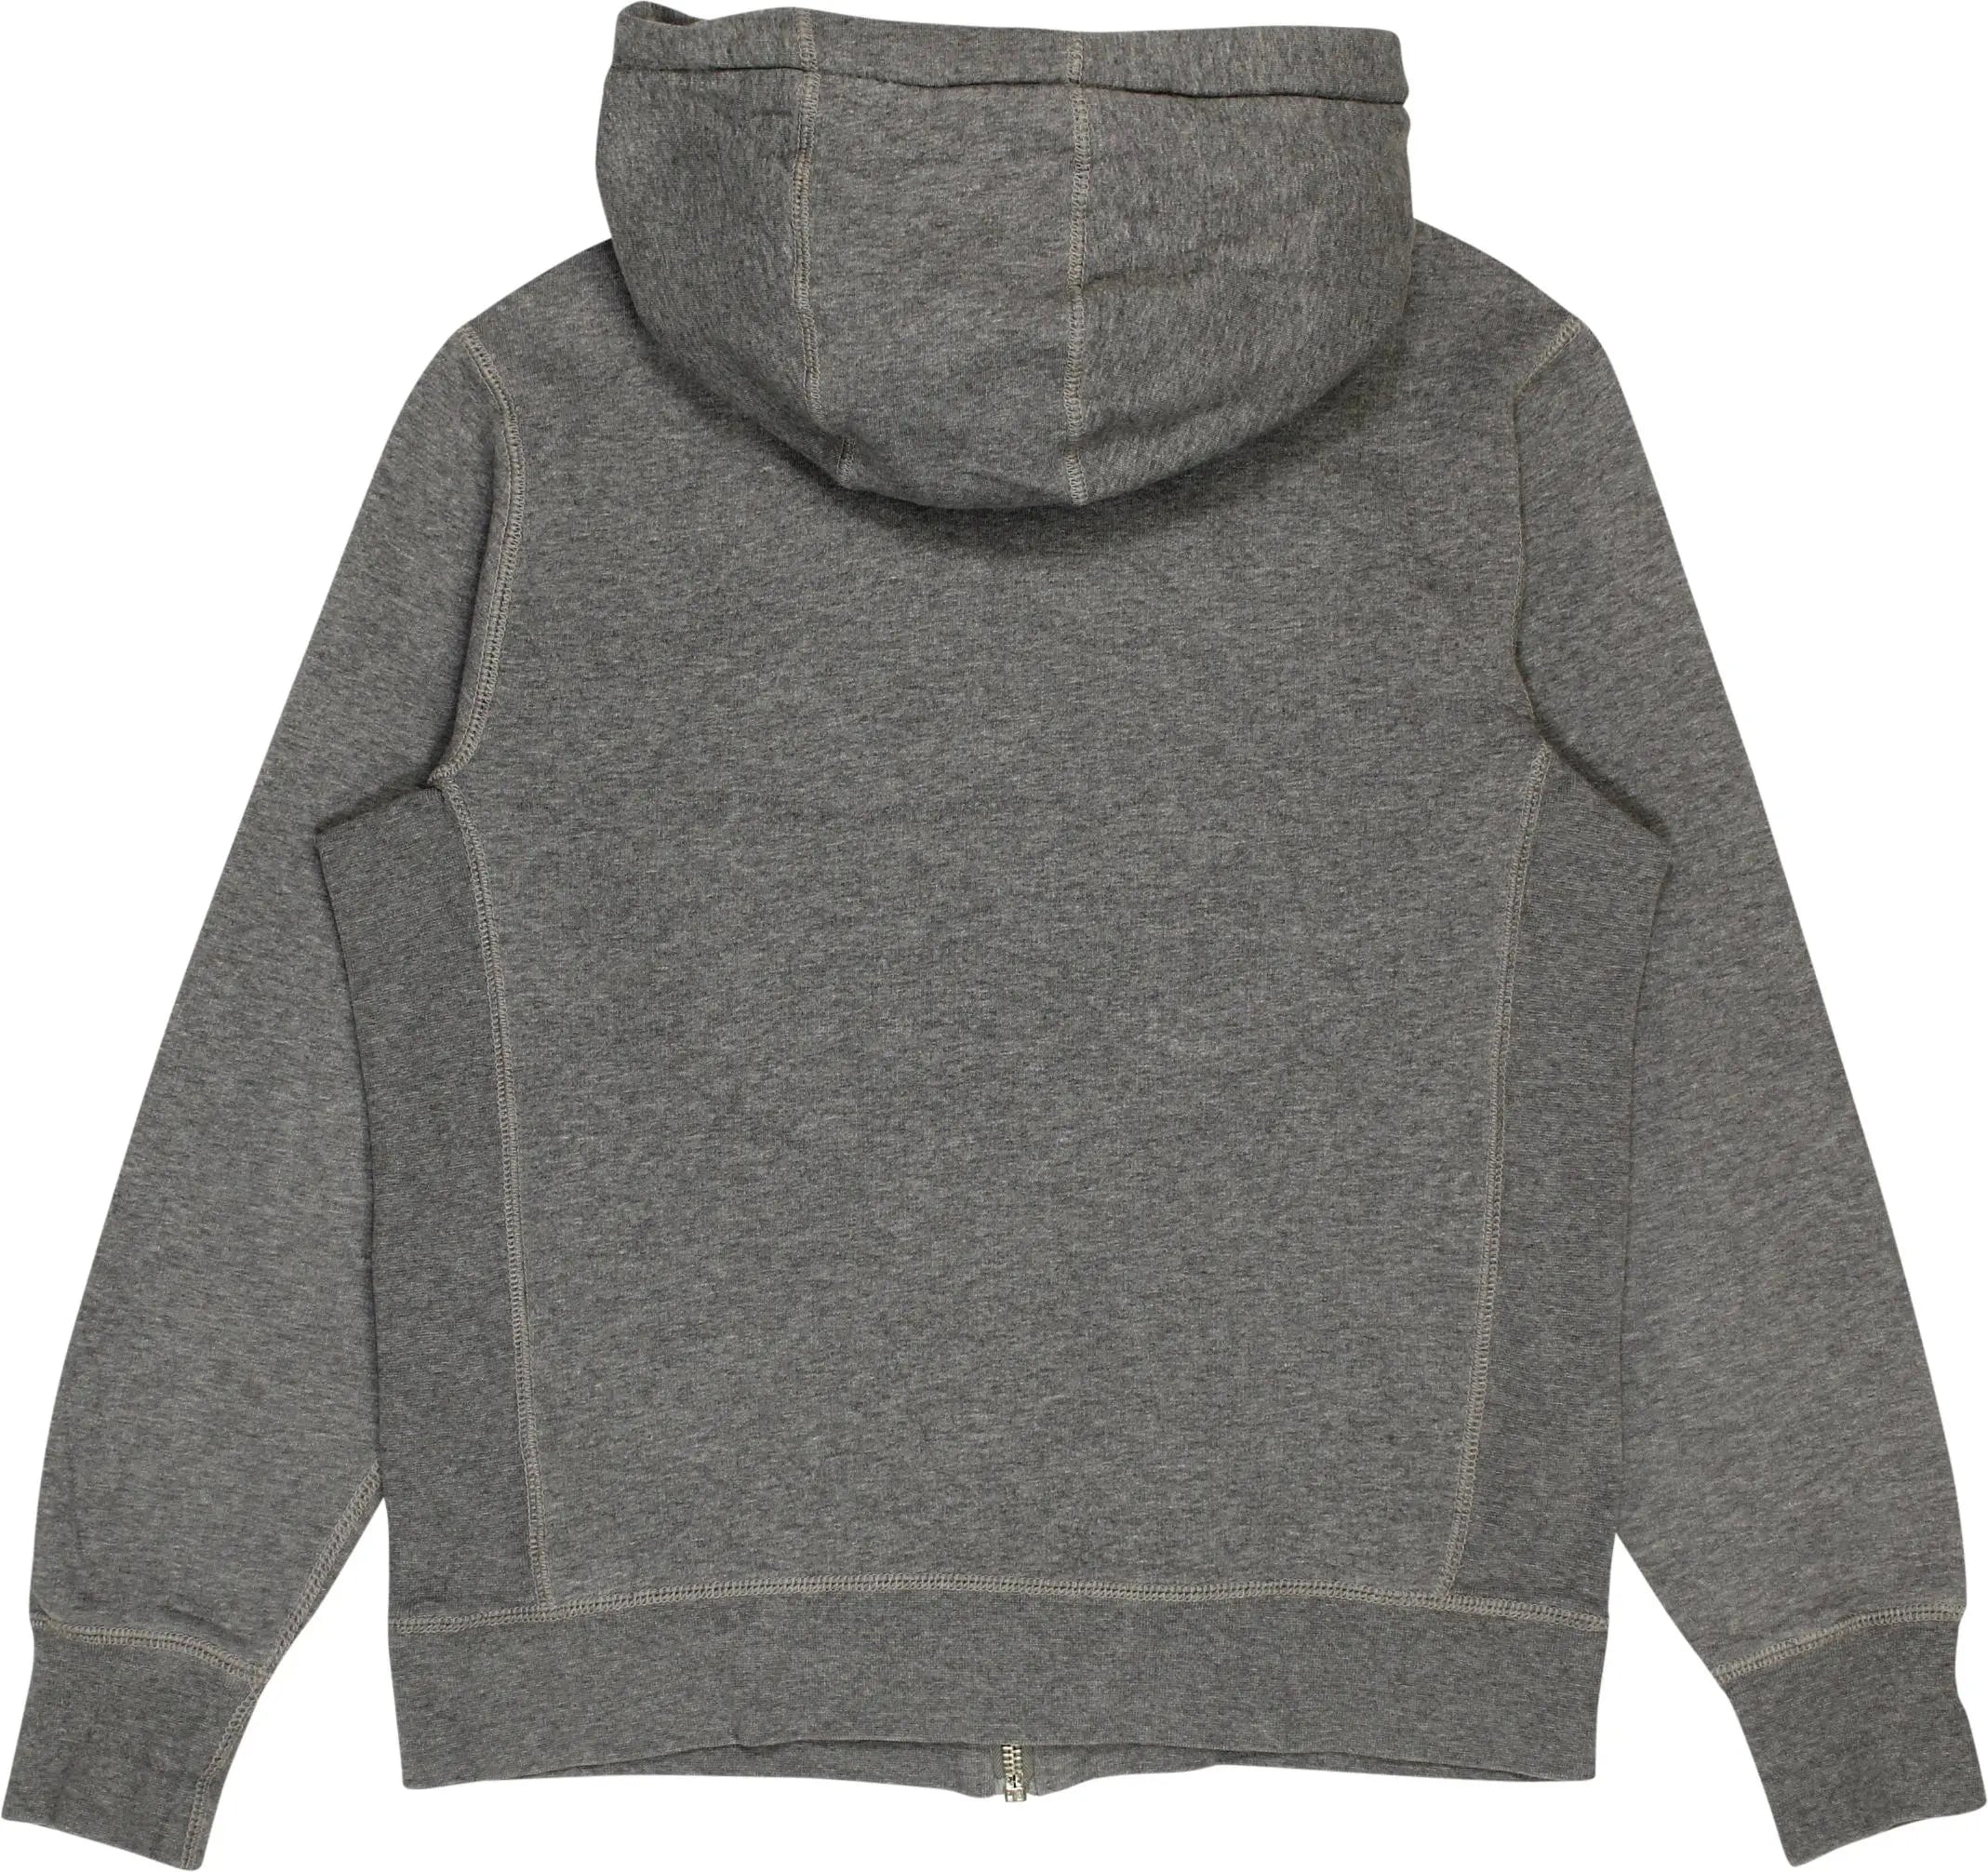 G-Star RAW - Grey Zip-up Hoodie by G-star RAW- ThriftTale.com - Vintage and second handclothing